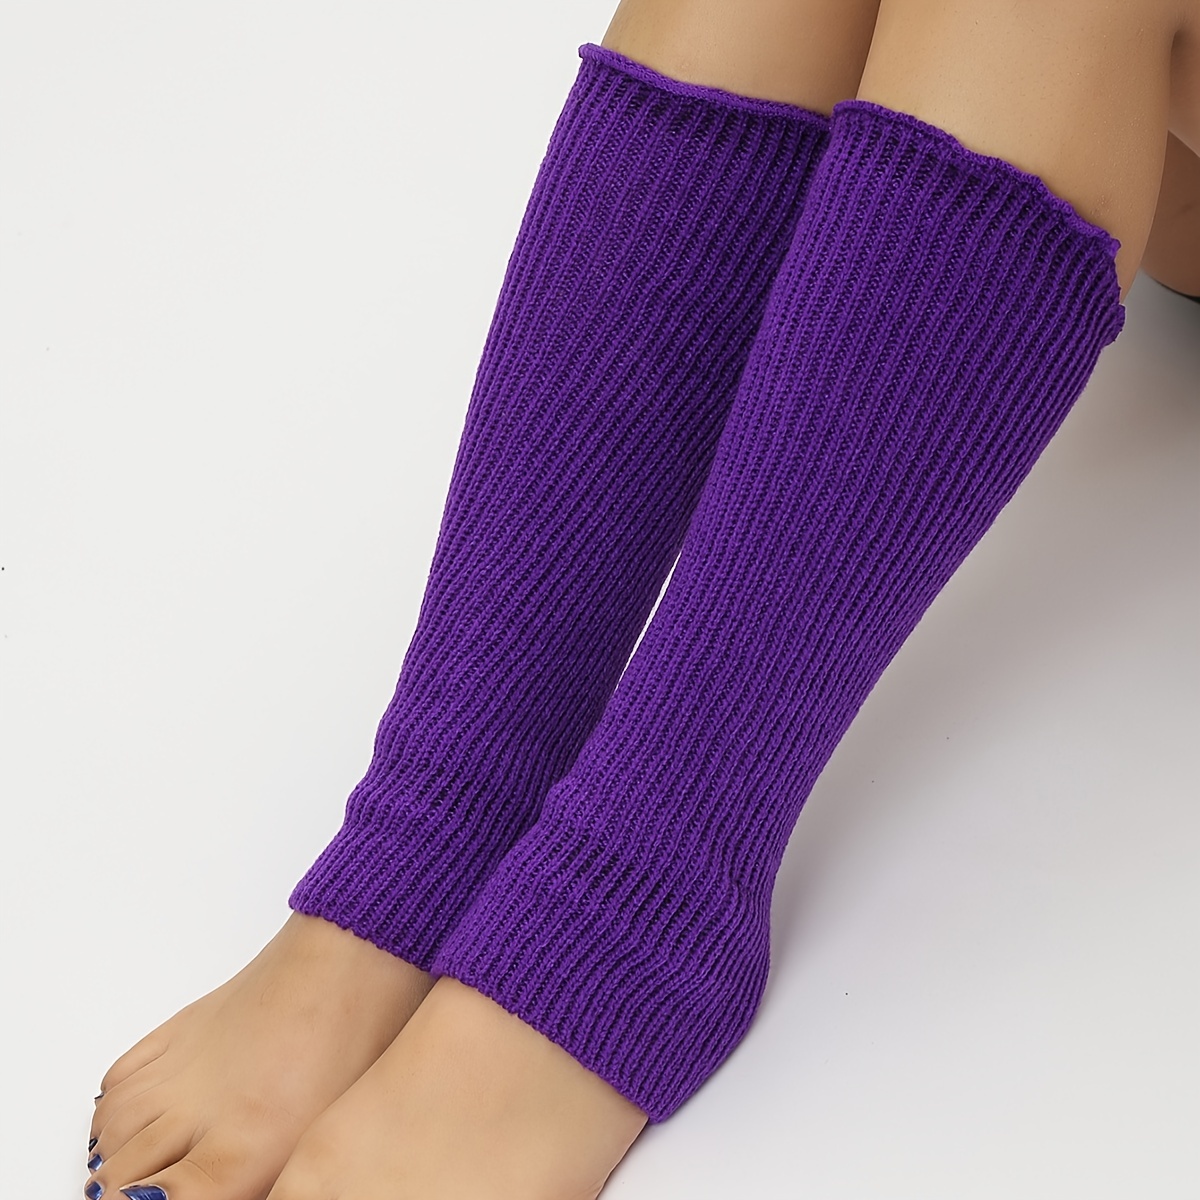 The 80s returns again, this time with leg warmers